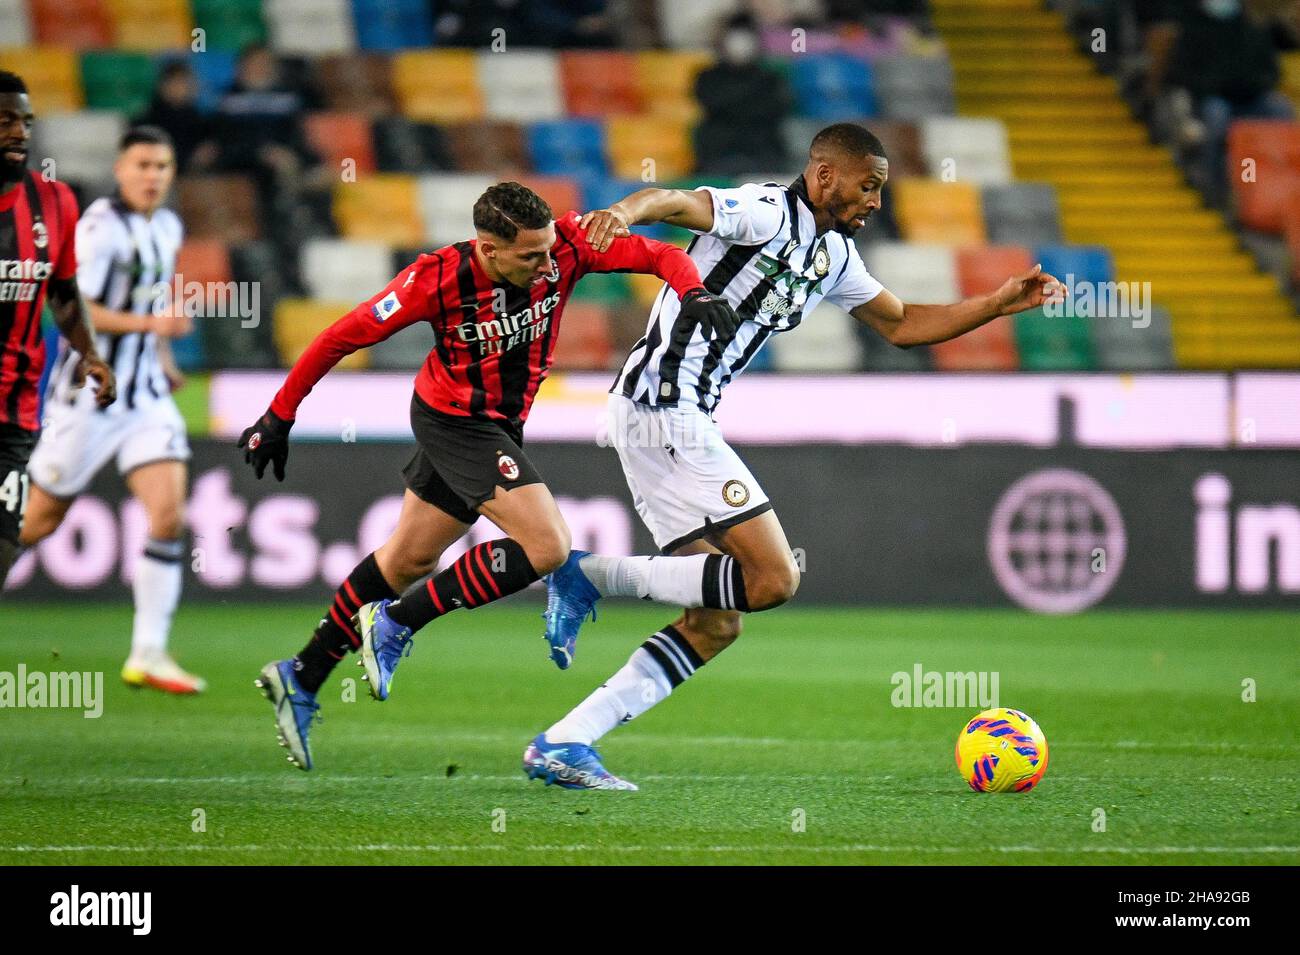 Udine, Italy. 11th Dec, 2021. Udinese's Norberto Bercique Gomes Betuncal in action against Milan's Ismael Bennacer (Milan) during Udinese Calcio vs AC Milan, italian soccer Serie A match in Udine, Italy, December 11 2021 Credit: Independent Photo Agency/Alamy Live News Stock Photo